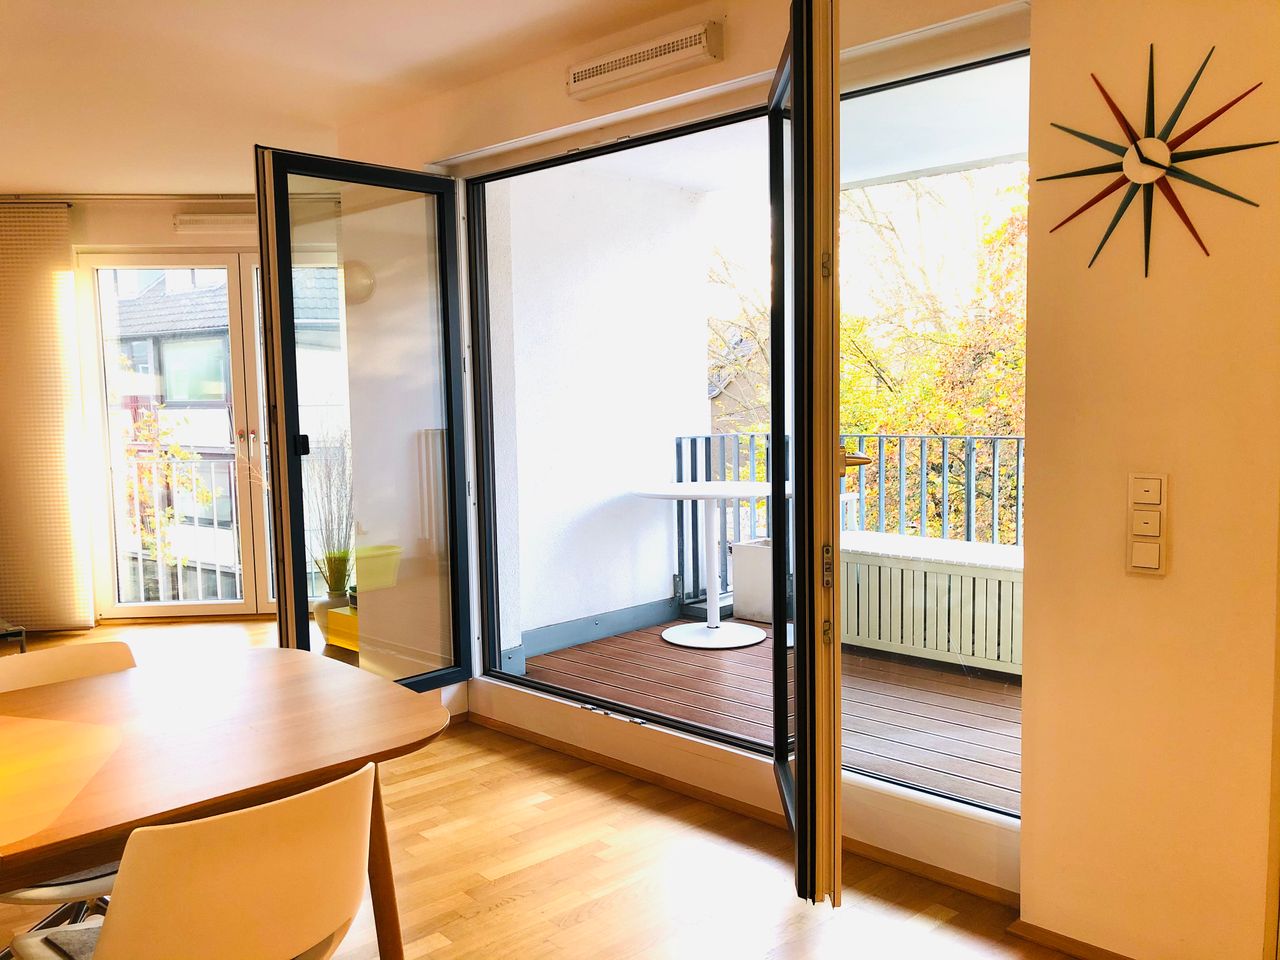 Modern, bright and comfortable flat with balcony in the heart of Cologne city- Mauritius quarter